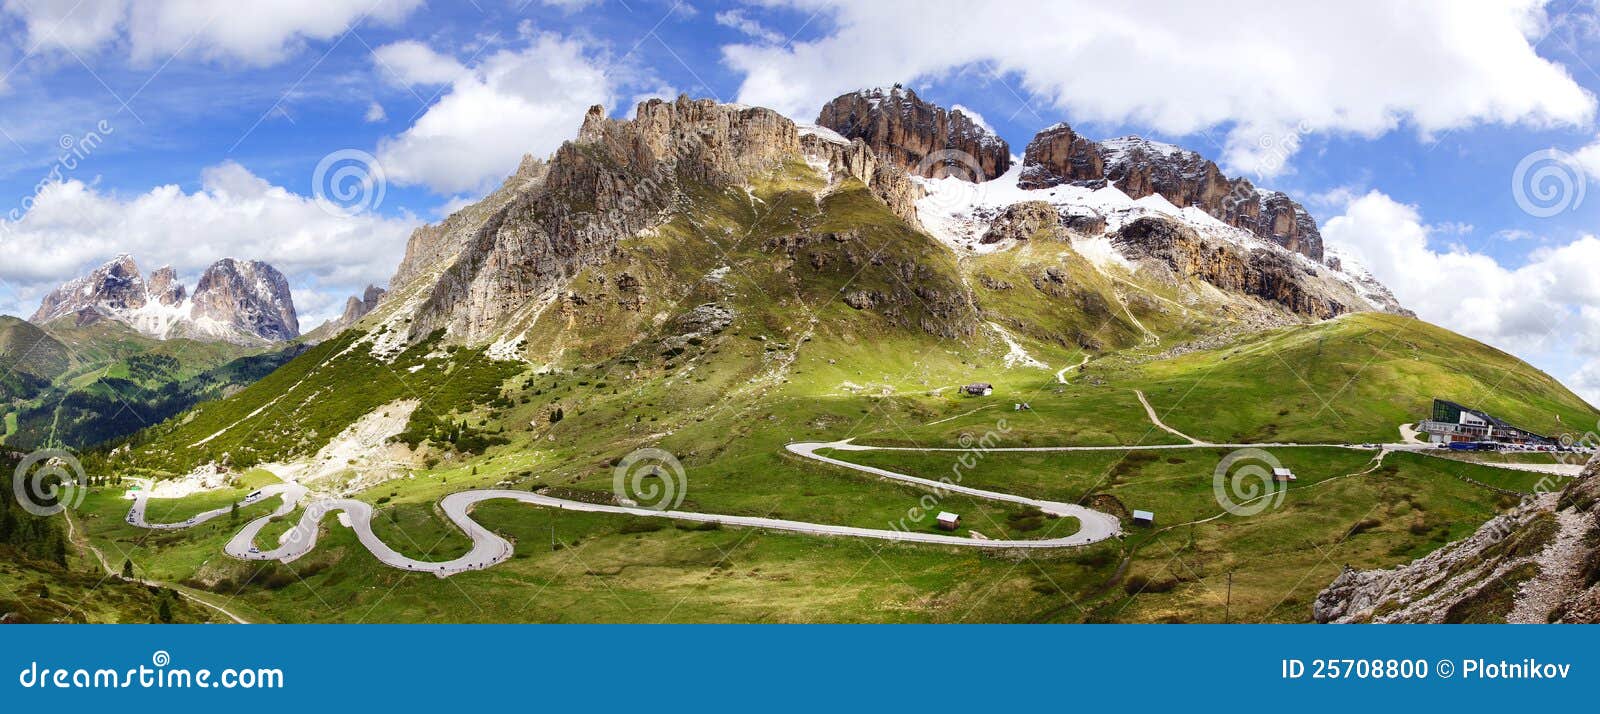 dolomites landscape with mountain road.